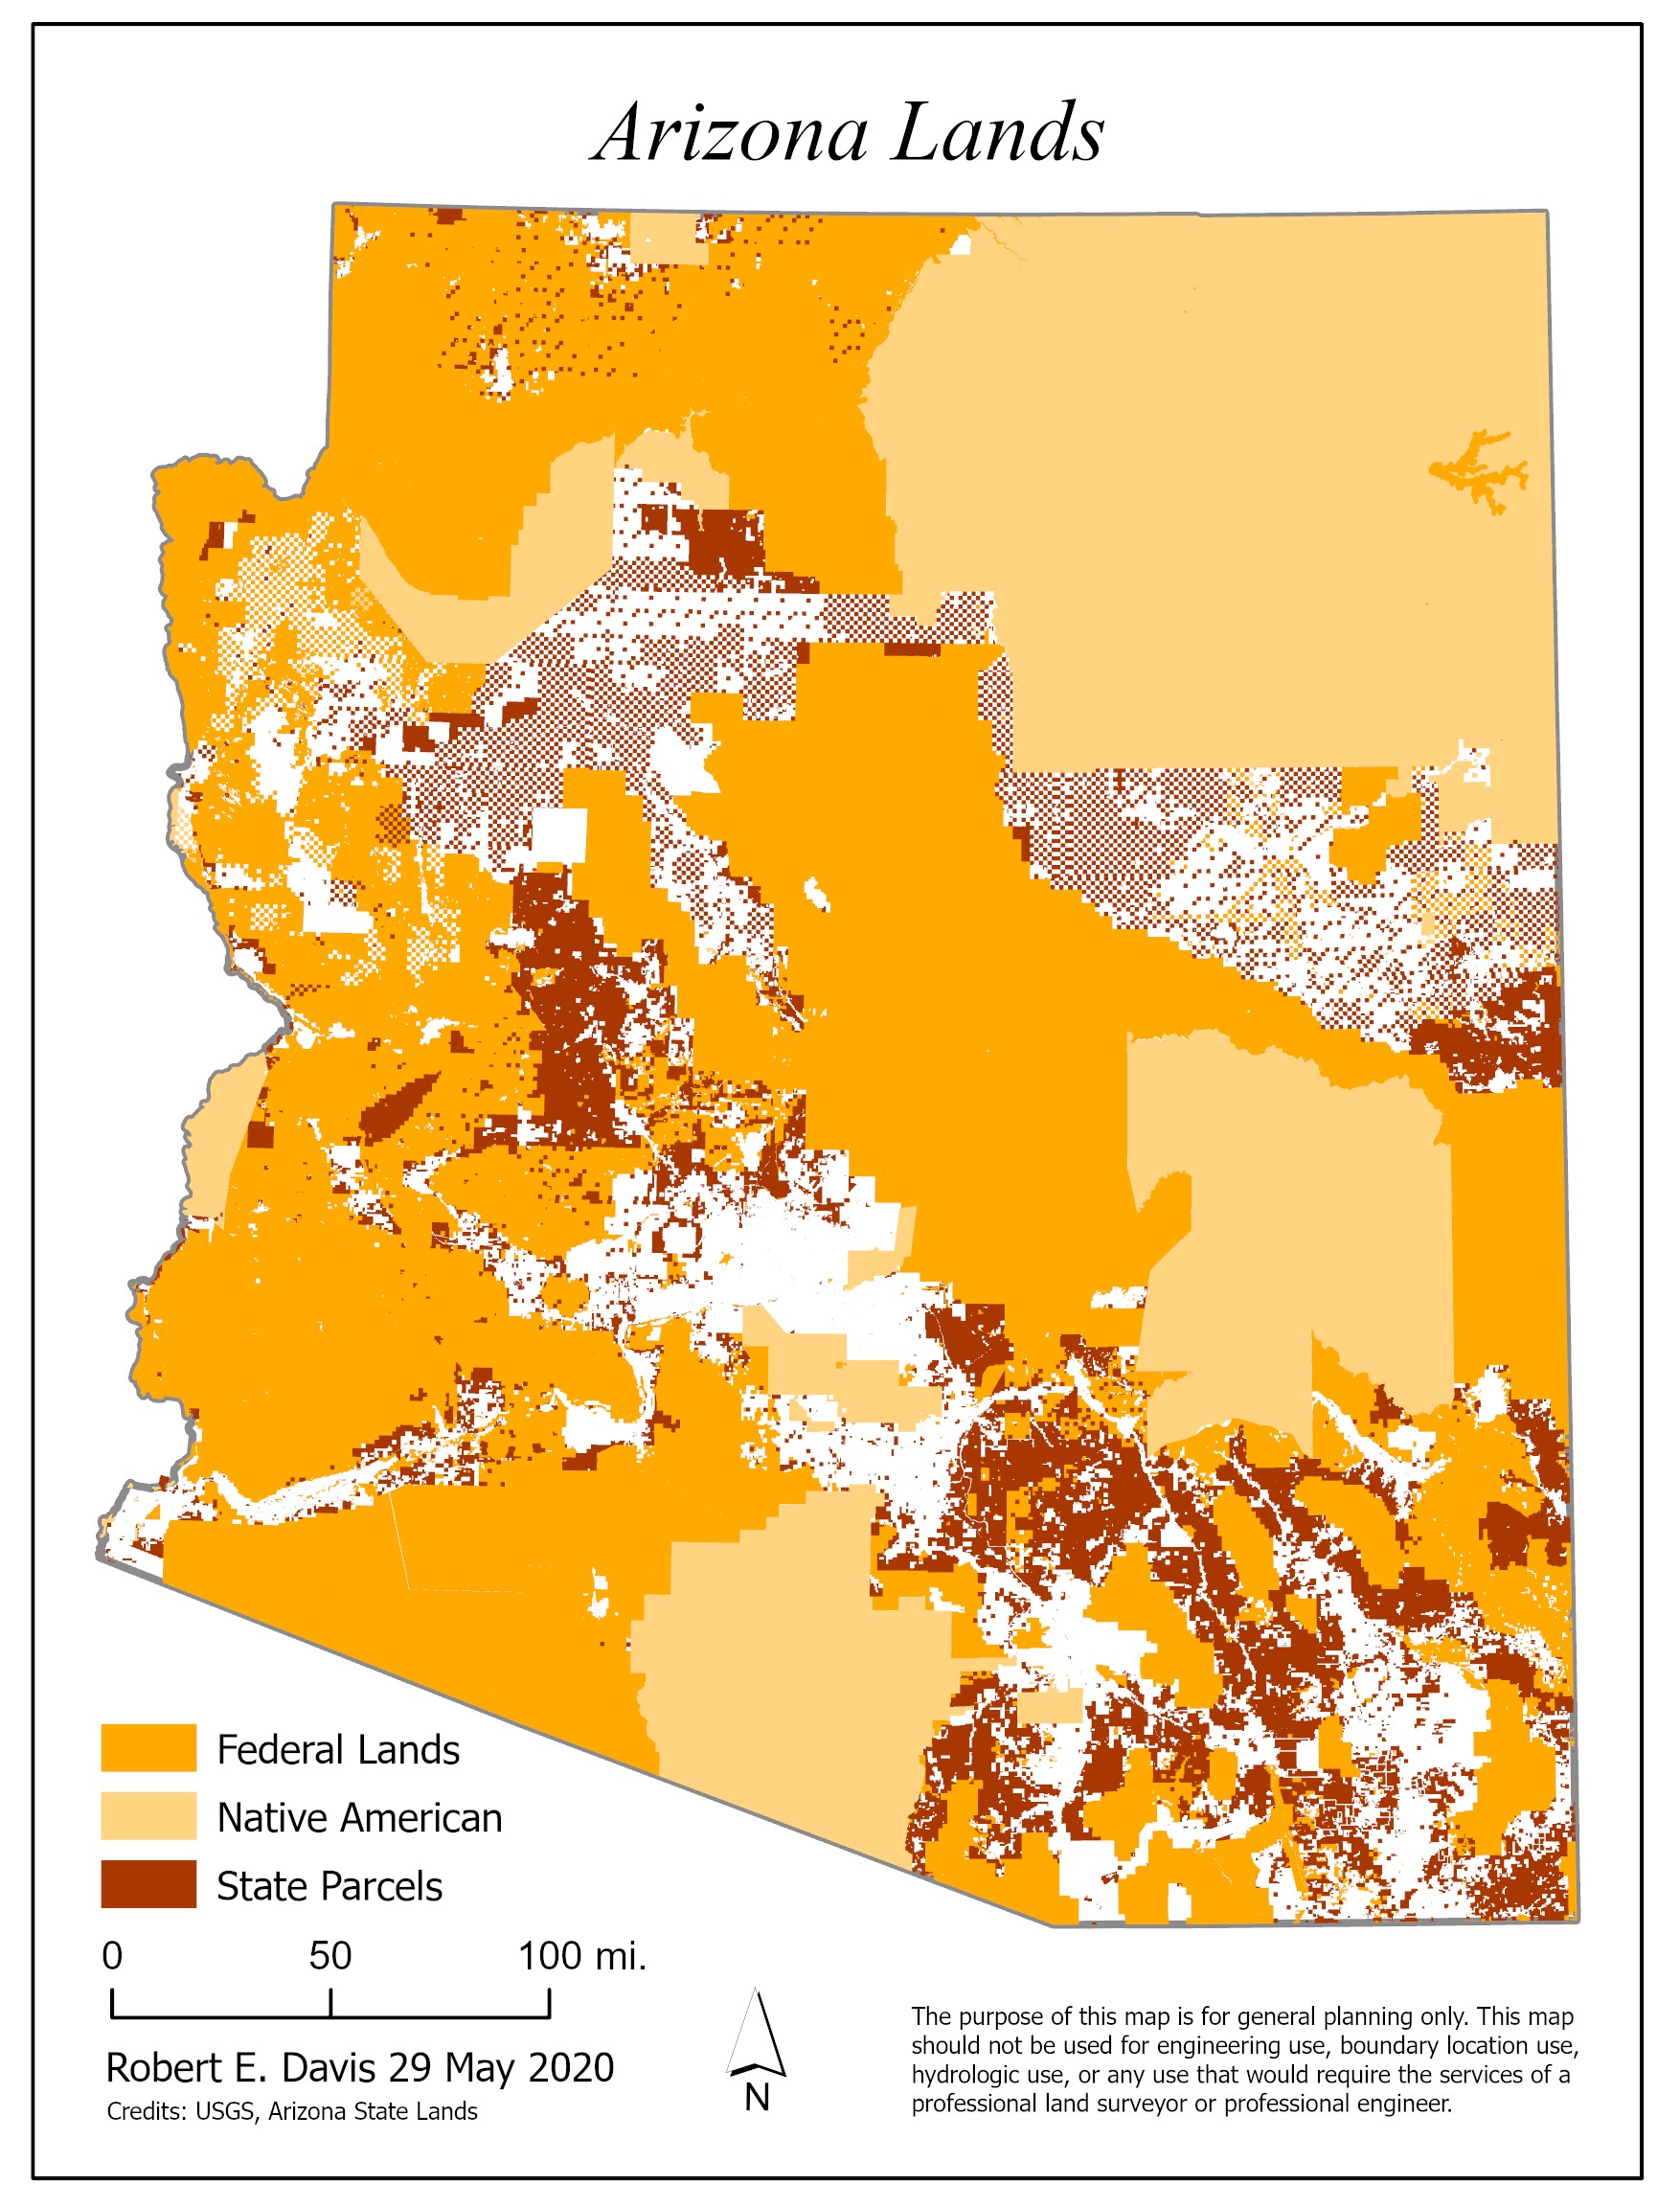 Arizona Lands map. - Private land makes up less than 18% of the area of Arizona, and more than half of that area has been paved or subdivided. Private parcels, as shown by the map, generally occur in the most well-watered valleys of the state. 